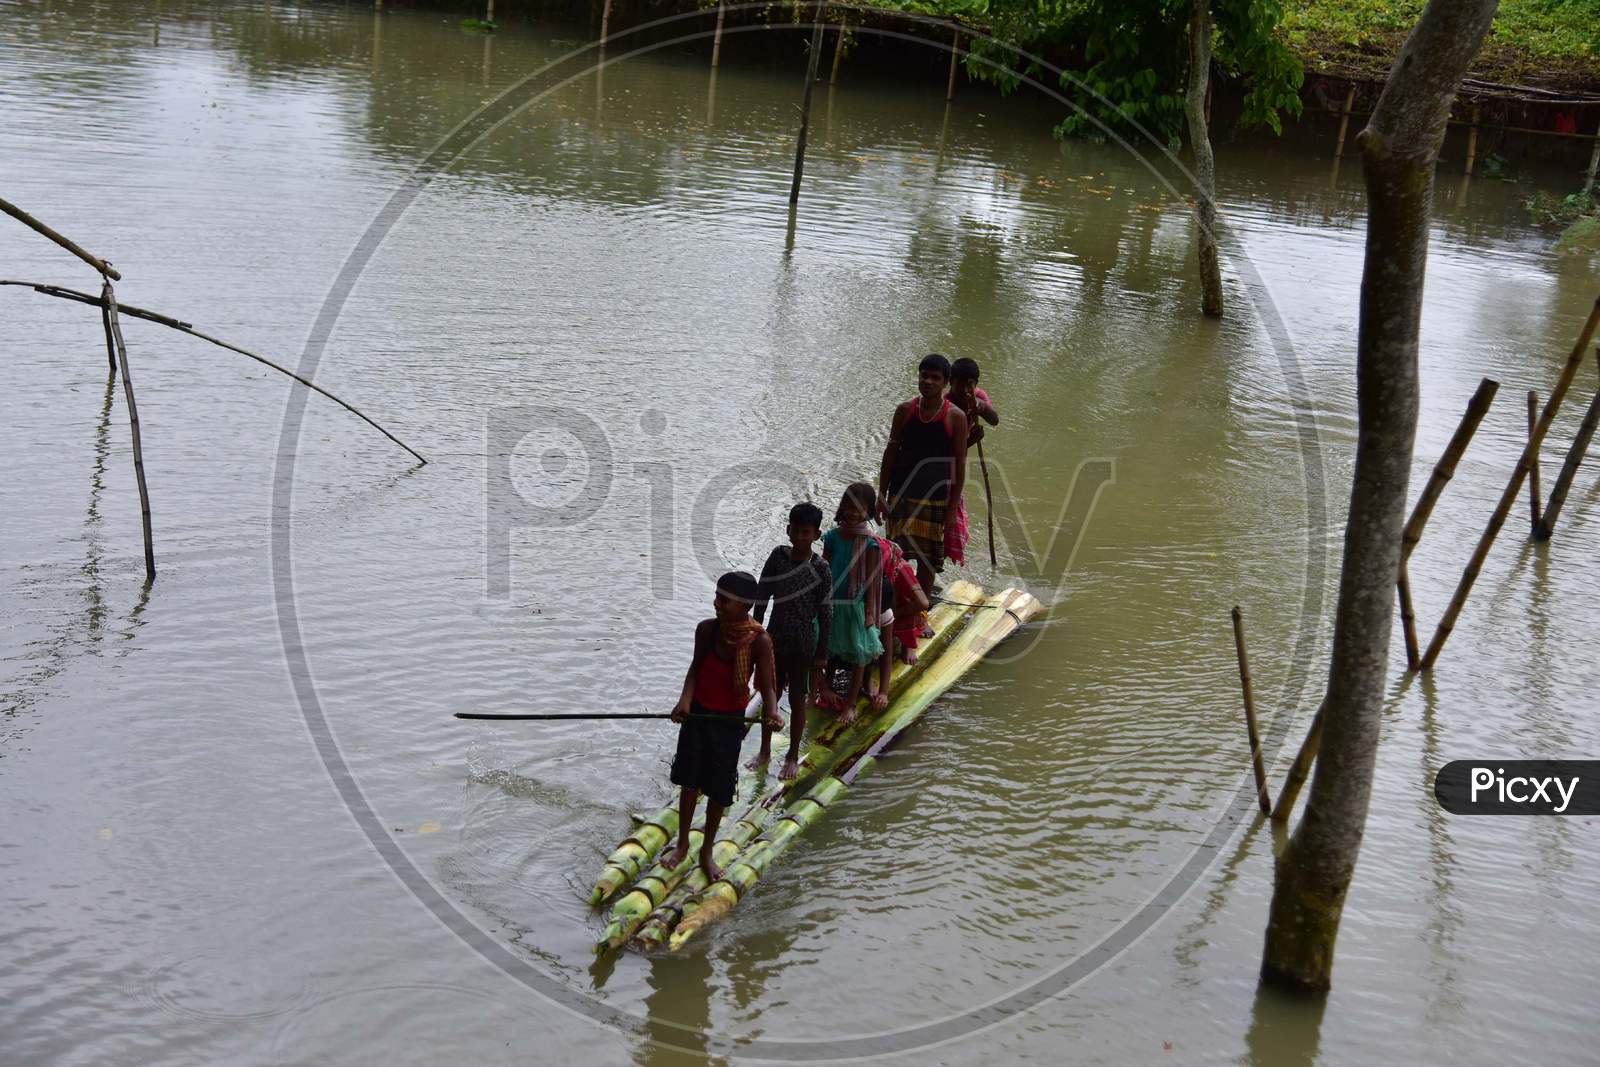 People wade through Floodwaters On A Makeshift Banana Raft Following Heavy Rainfall At Bhurbandha Village In Nagaon District Of Assam On June 27, 2020.